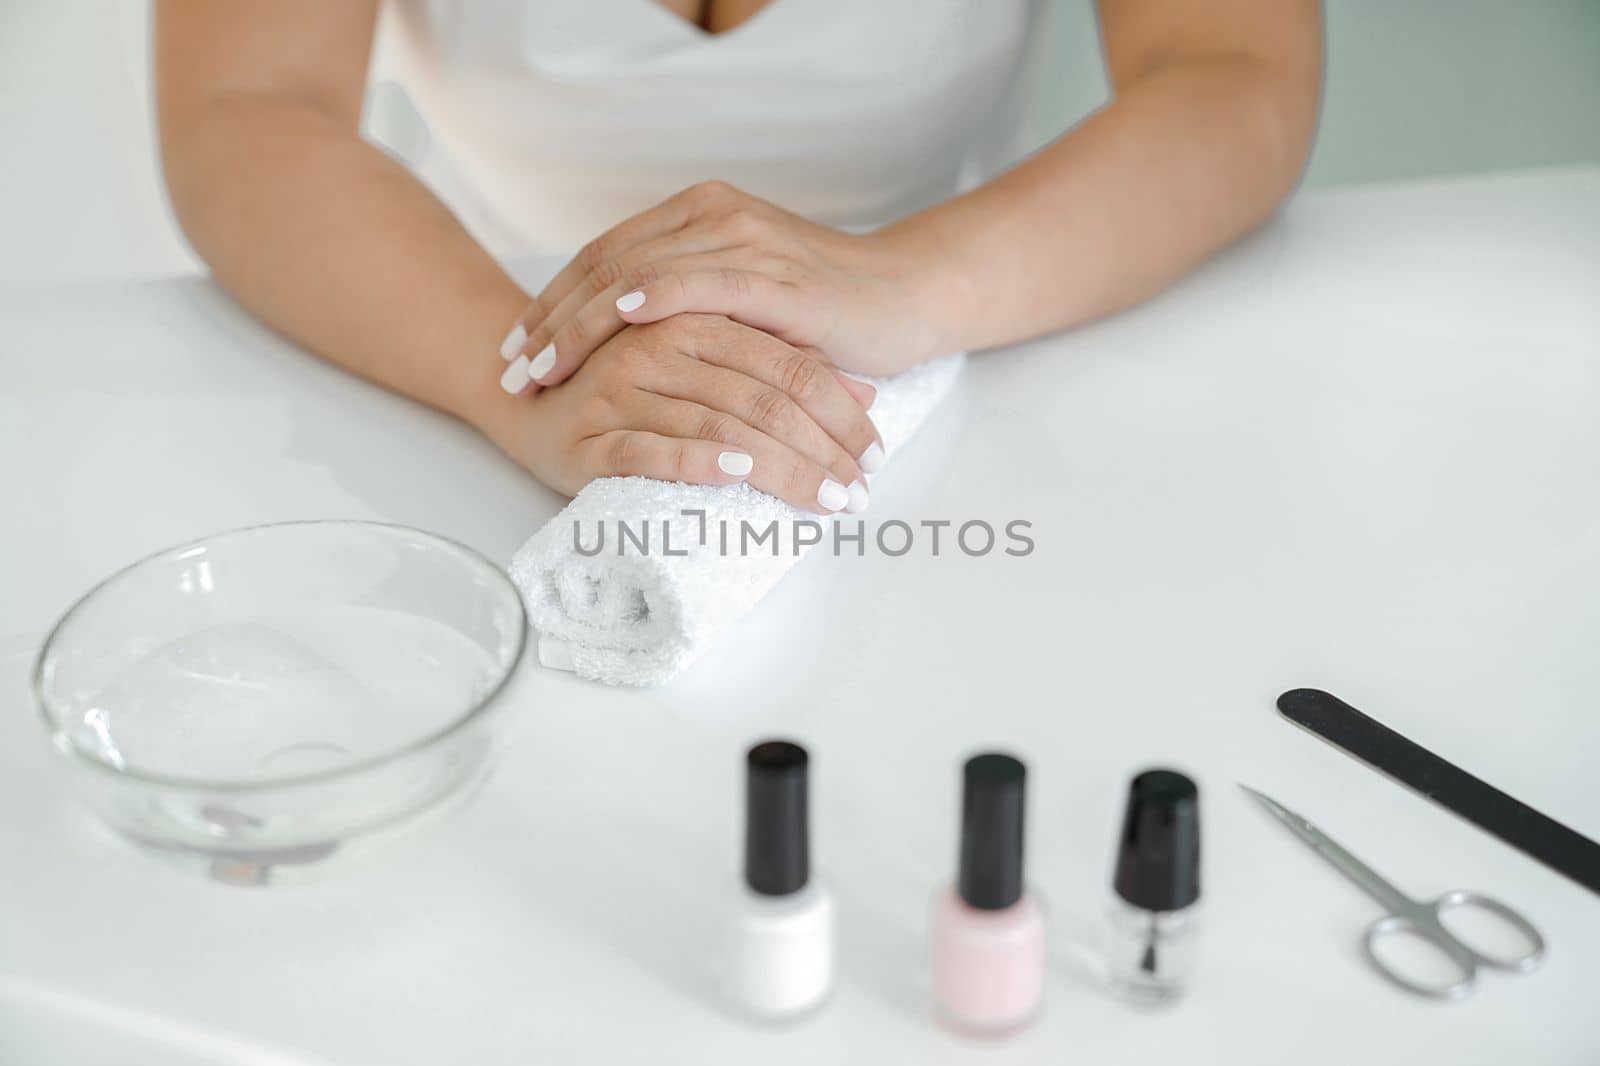 Women's hands with white manicure are lying on towel roller, waiting for varnish to dry, manicure accessories are lying on table next to it. Hands close-up, front view, without face